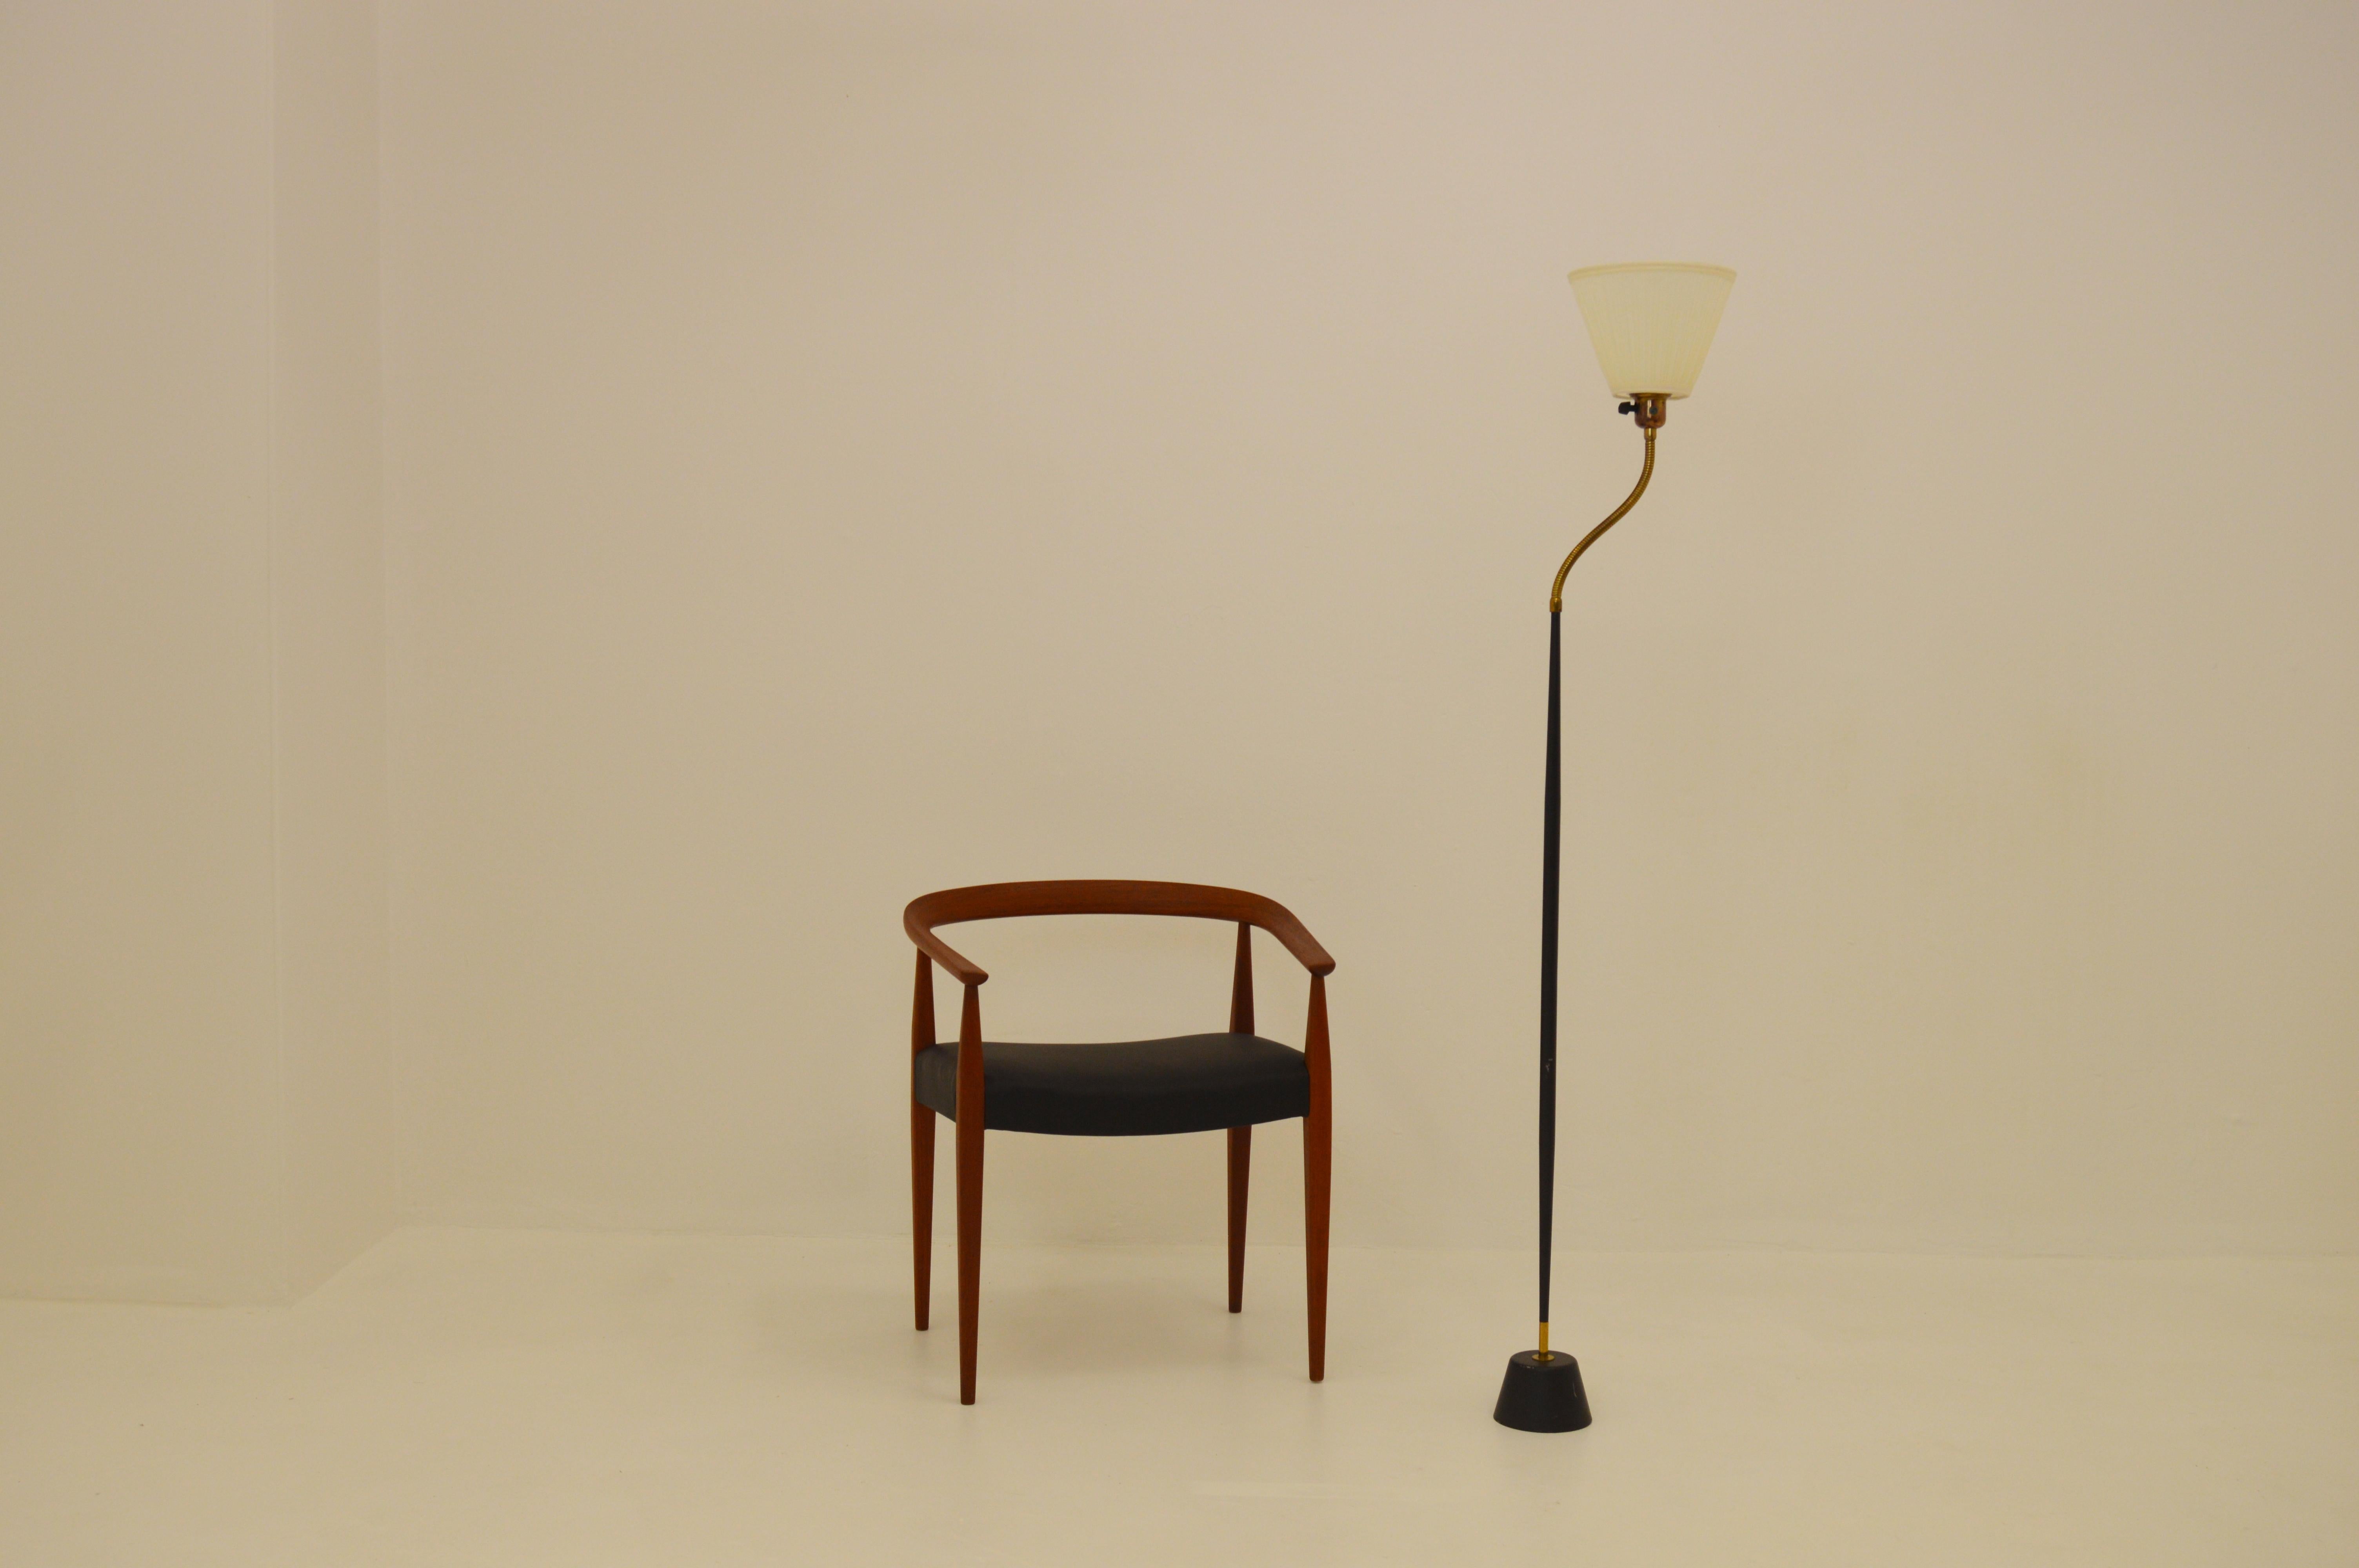 Rare Scandinavian Modern floor lamp. Cone shaped bar, and black lacquered metal with an adjustable brass arm. Produced for ASEA by unknown designer. Lampshade made by fabric with plastic inside.
Measurements below is the foot base diameter and